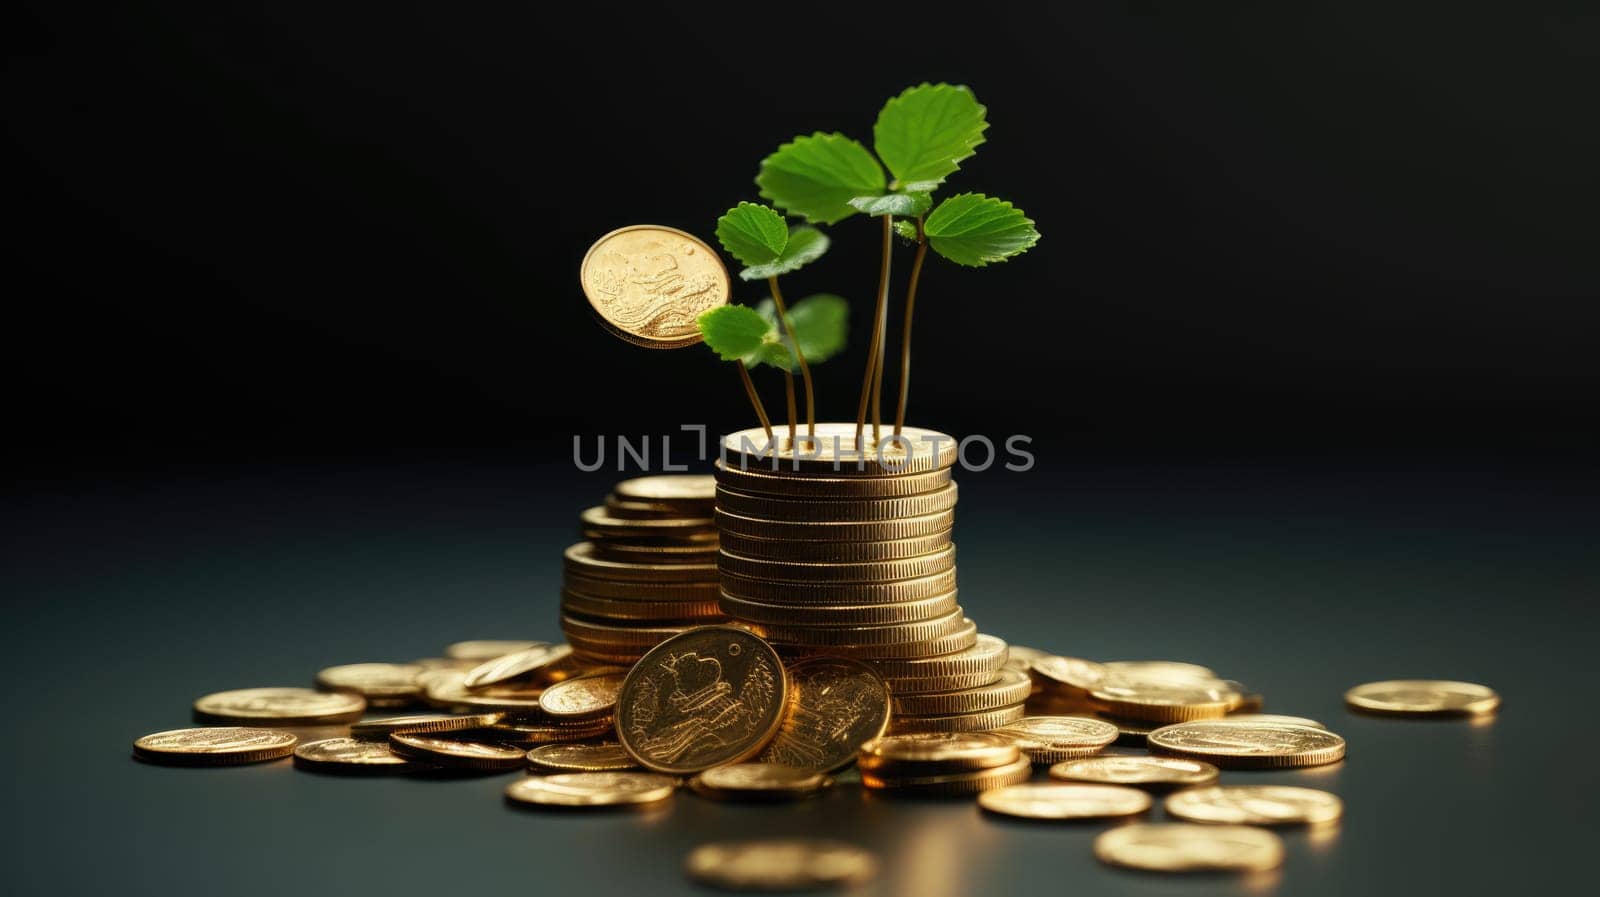 Green clover leaves are growing on stack of gold coins on black background symbolizing luck and prosperity. St Patricks Day by JuliaDorian